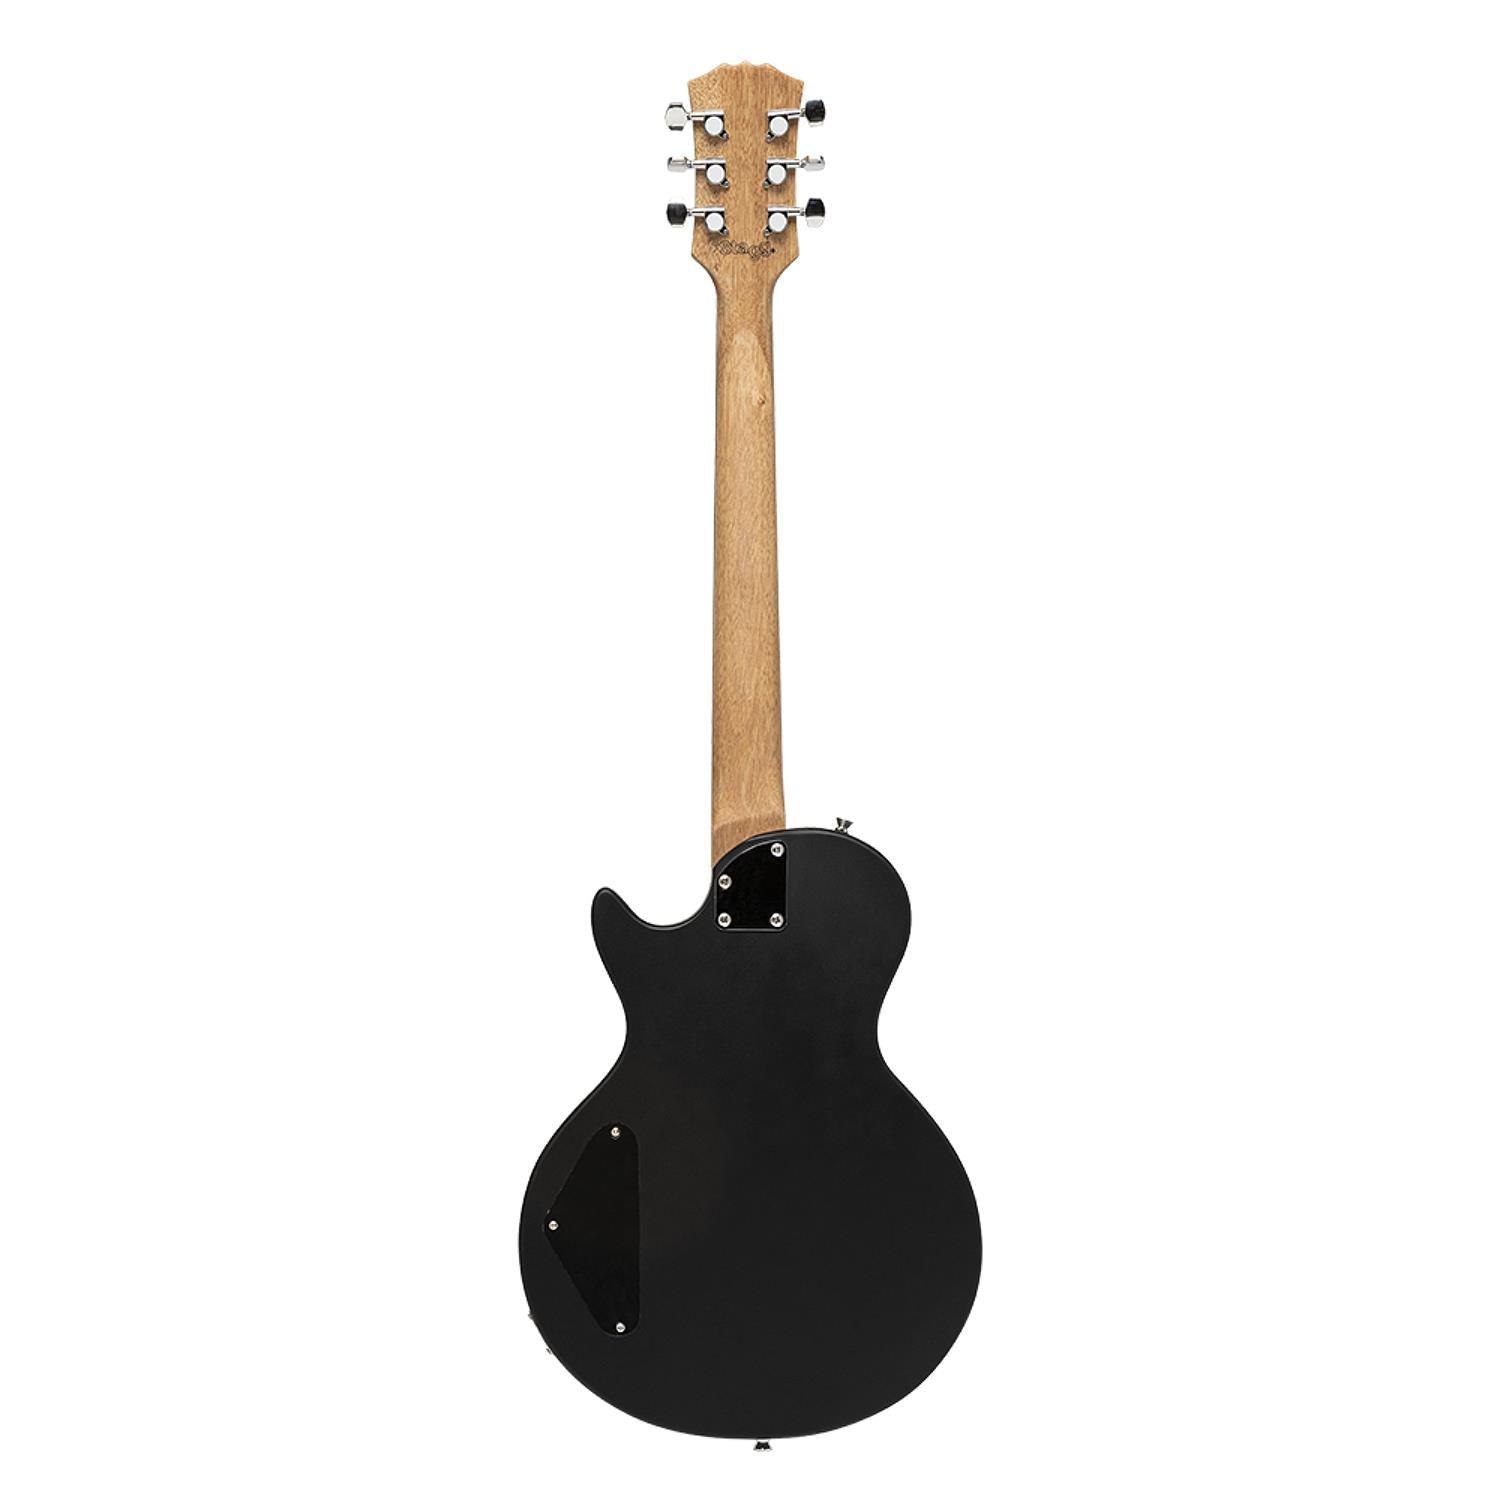 Stagg SEL-HB90 BLK Black Standard Mahogany Electric Guitar - DY Pro Audio